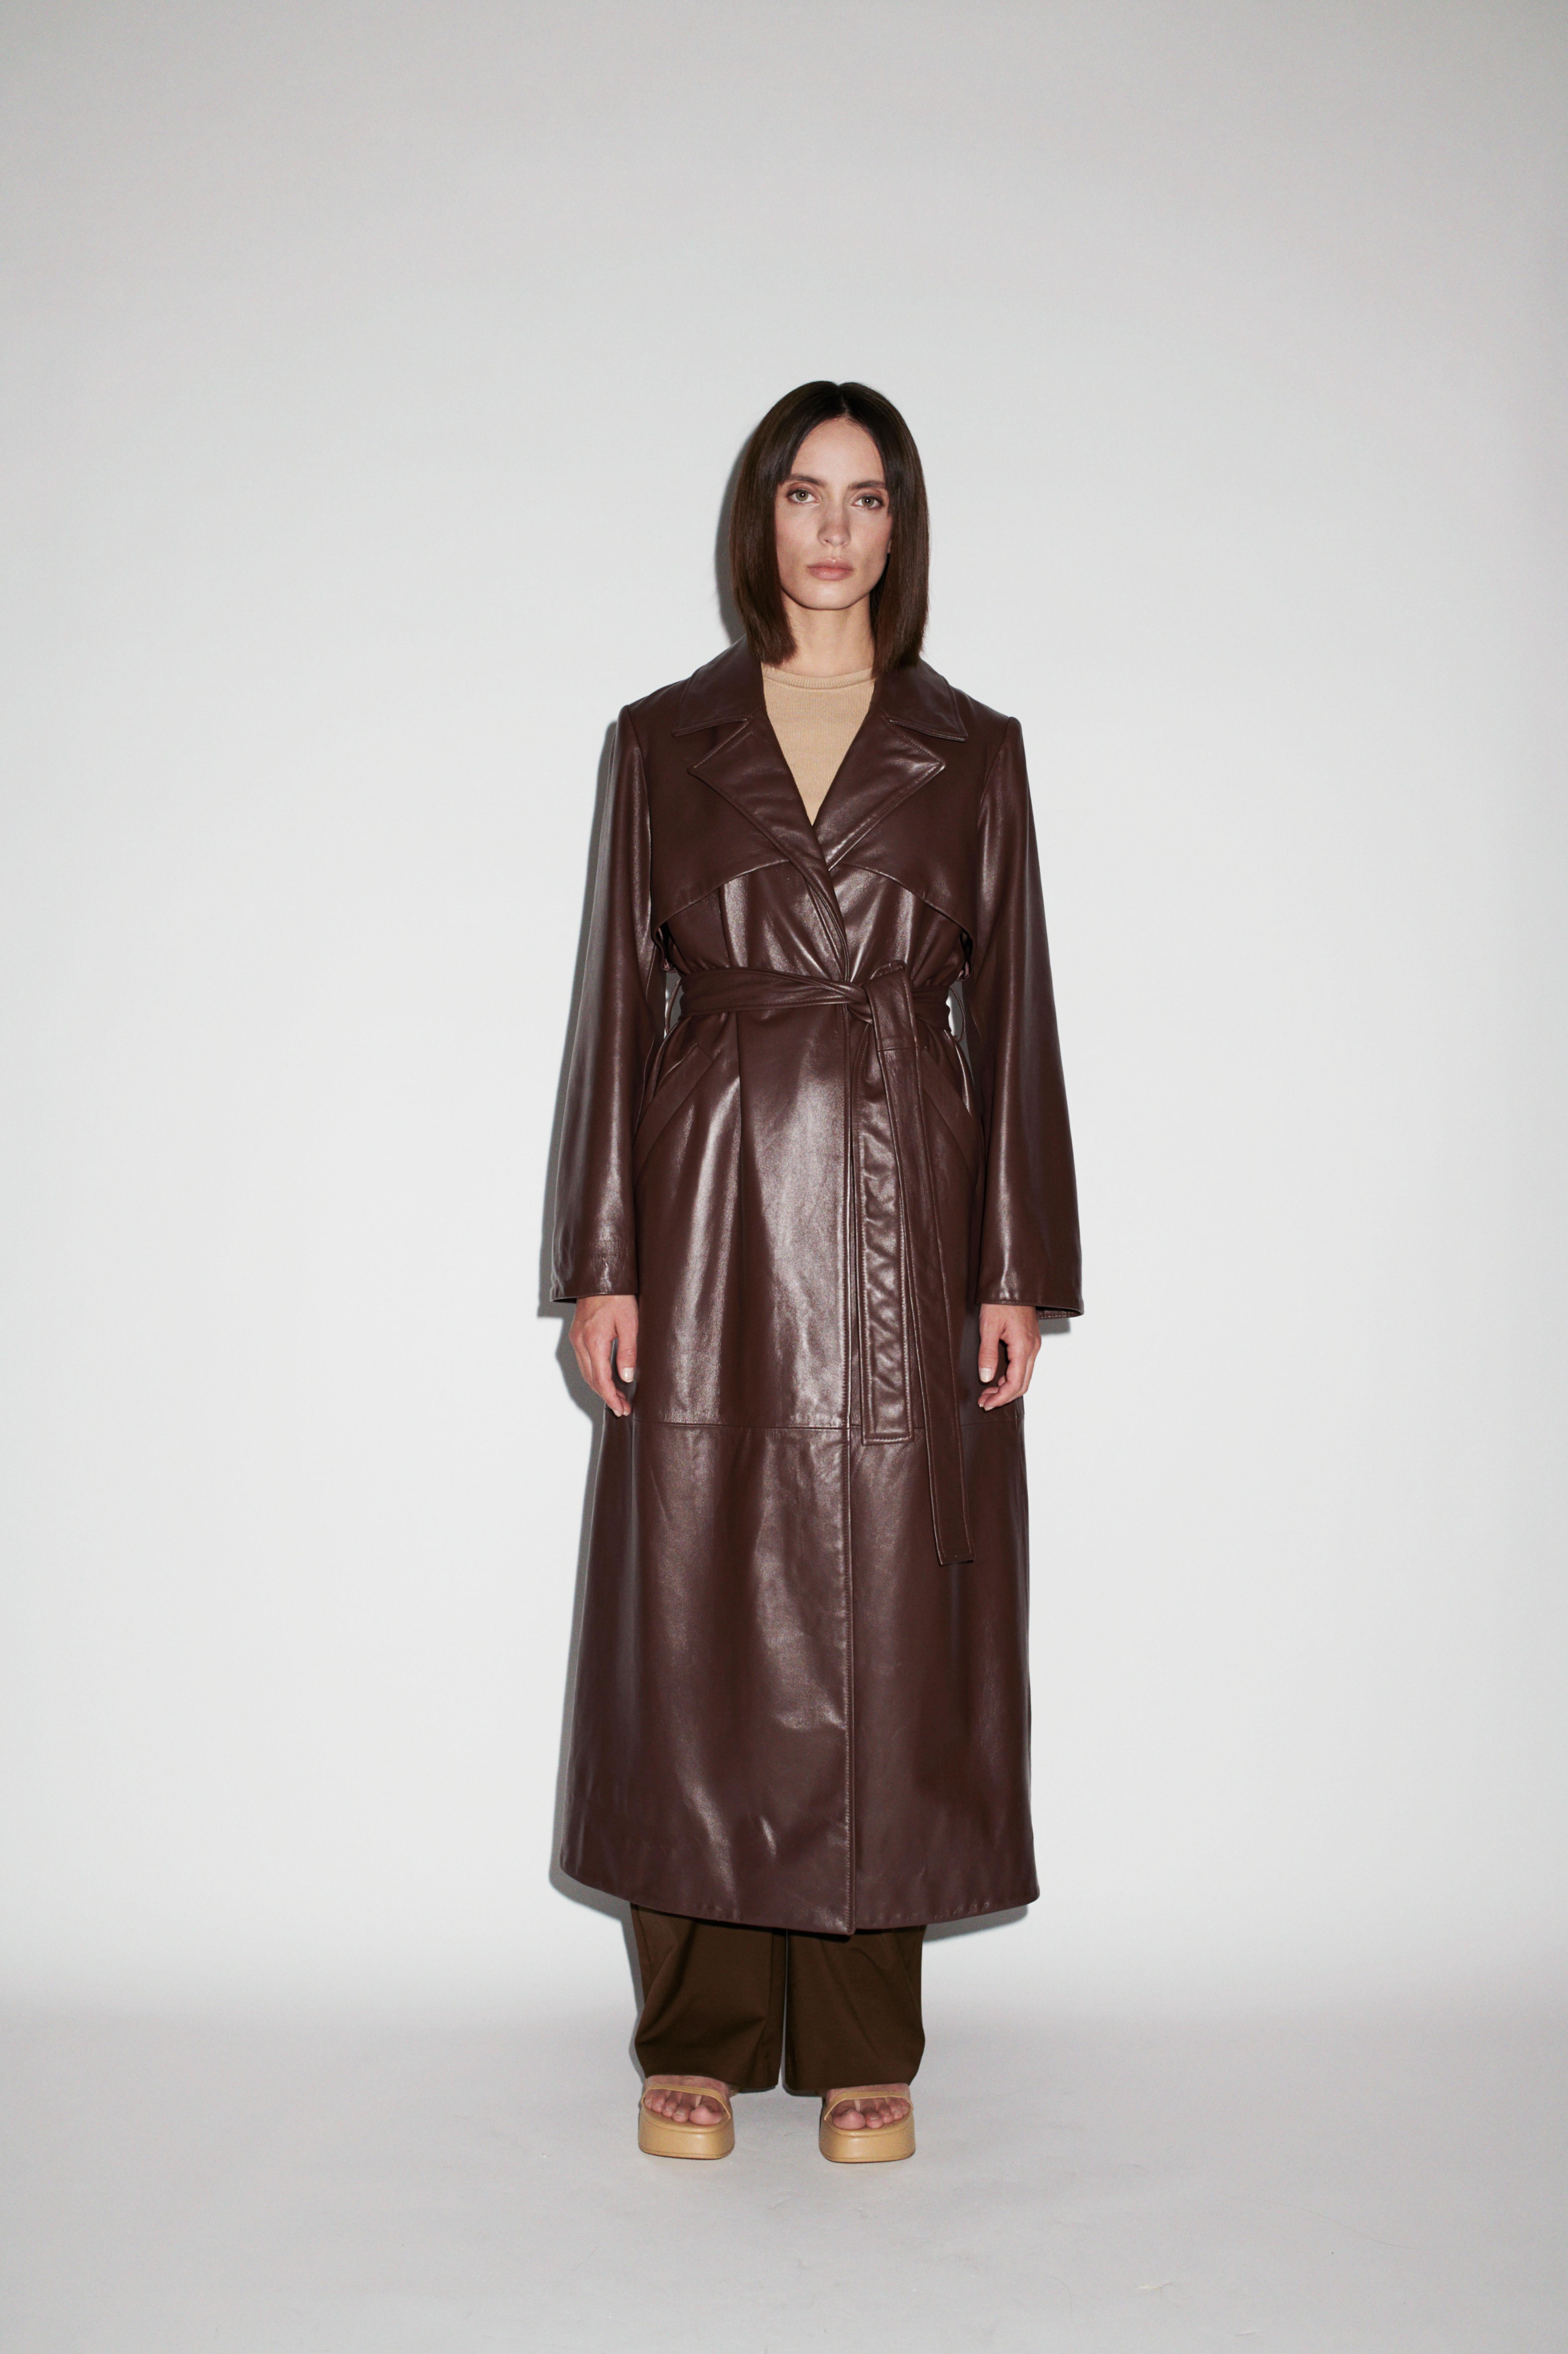 Verheyen London Leather Trench Coat in Black - Size uk 14

Handmade in London, made with 100% Italian Lambs Leather this luxury item is an investment piece to wear for a lifetime.  This piece is made by artisans in London, expert artisans who make